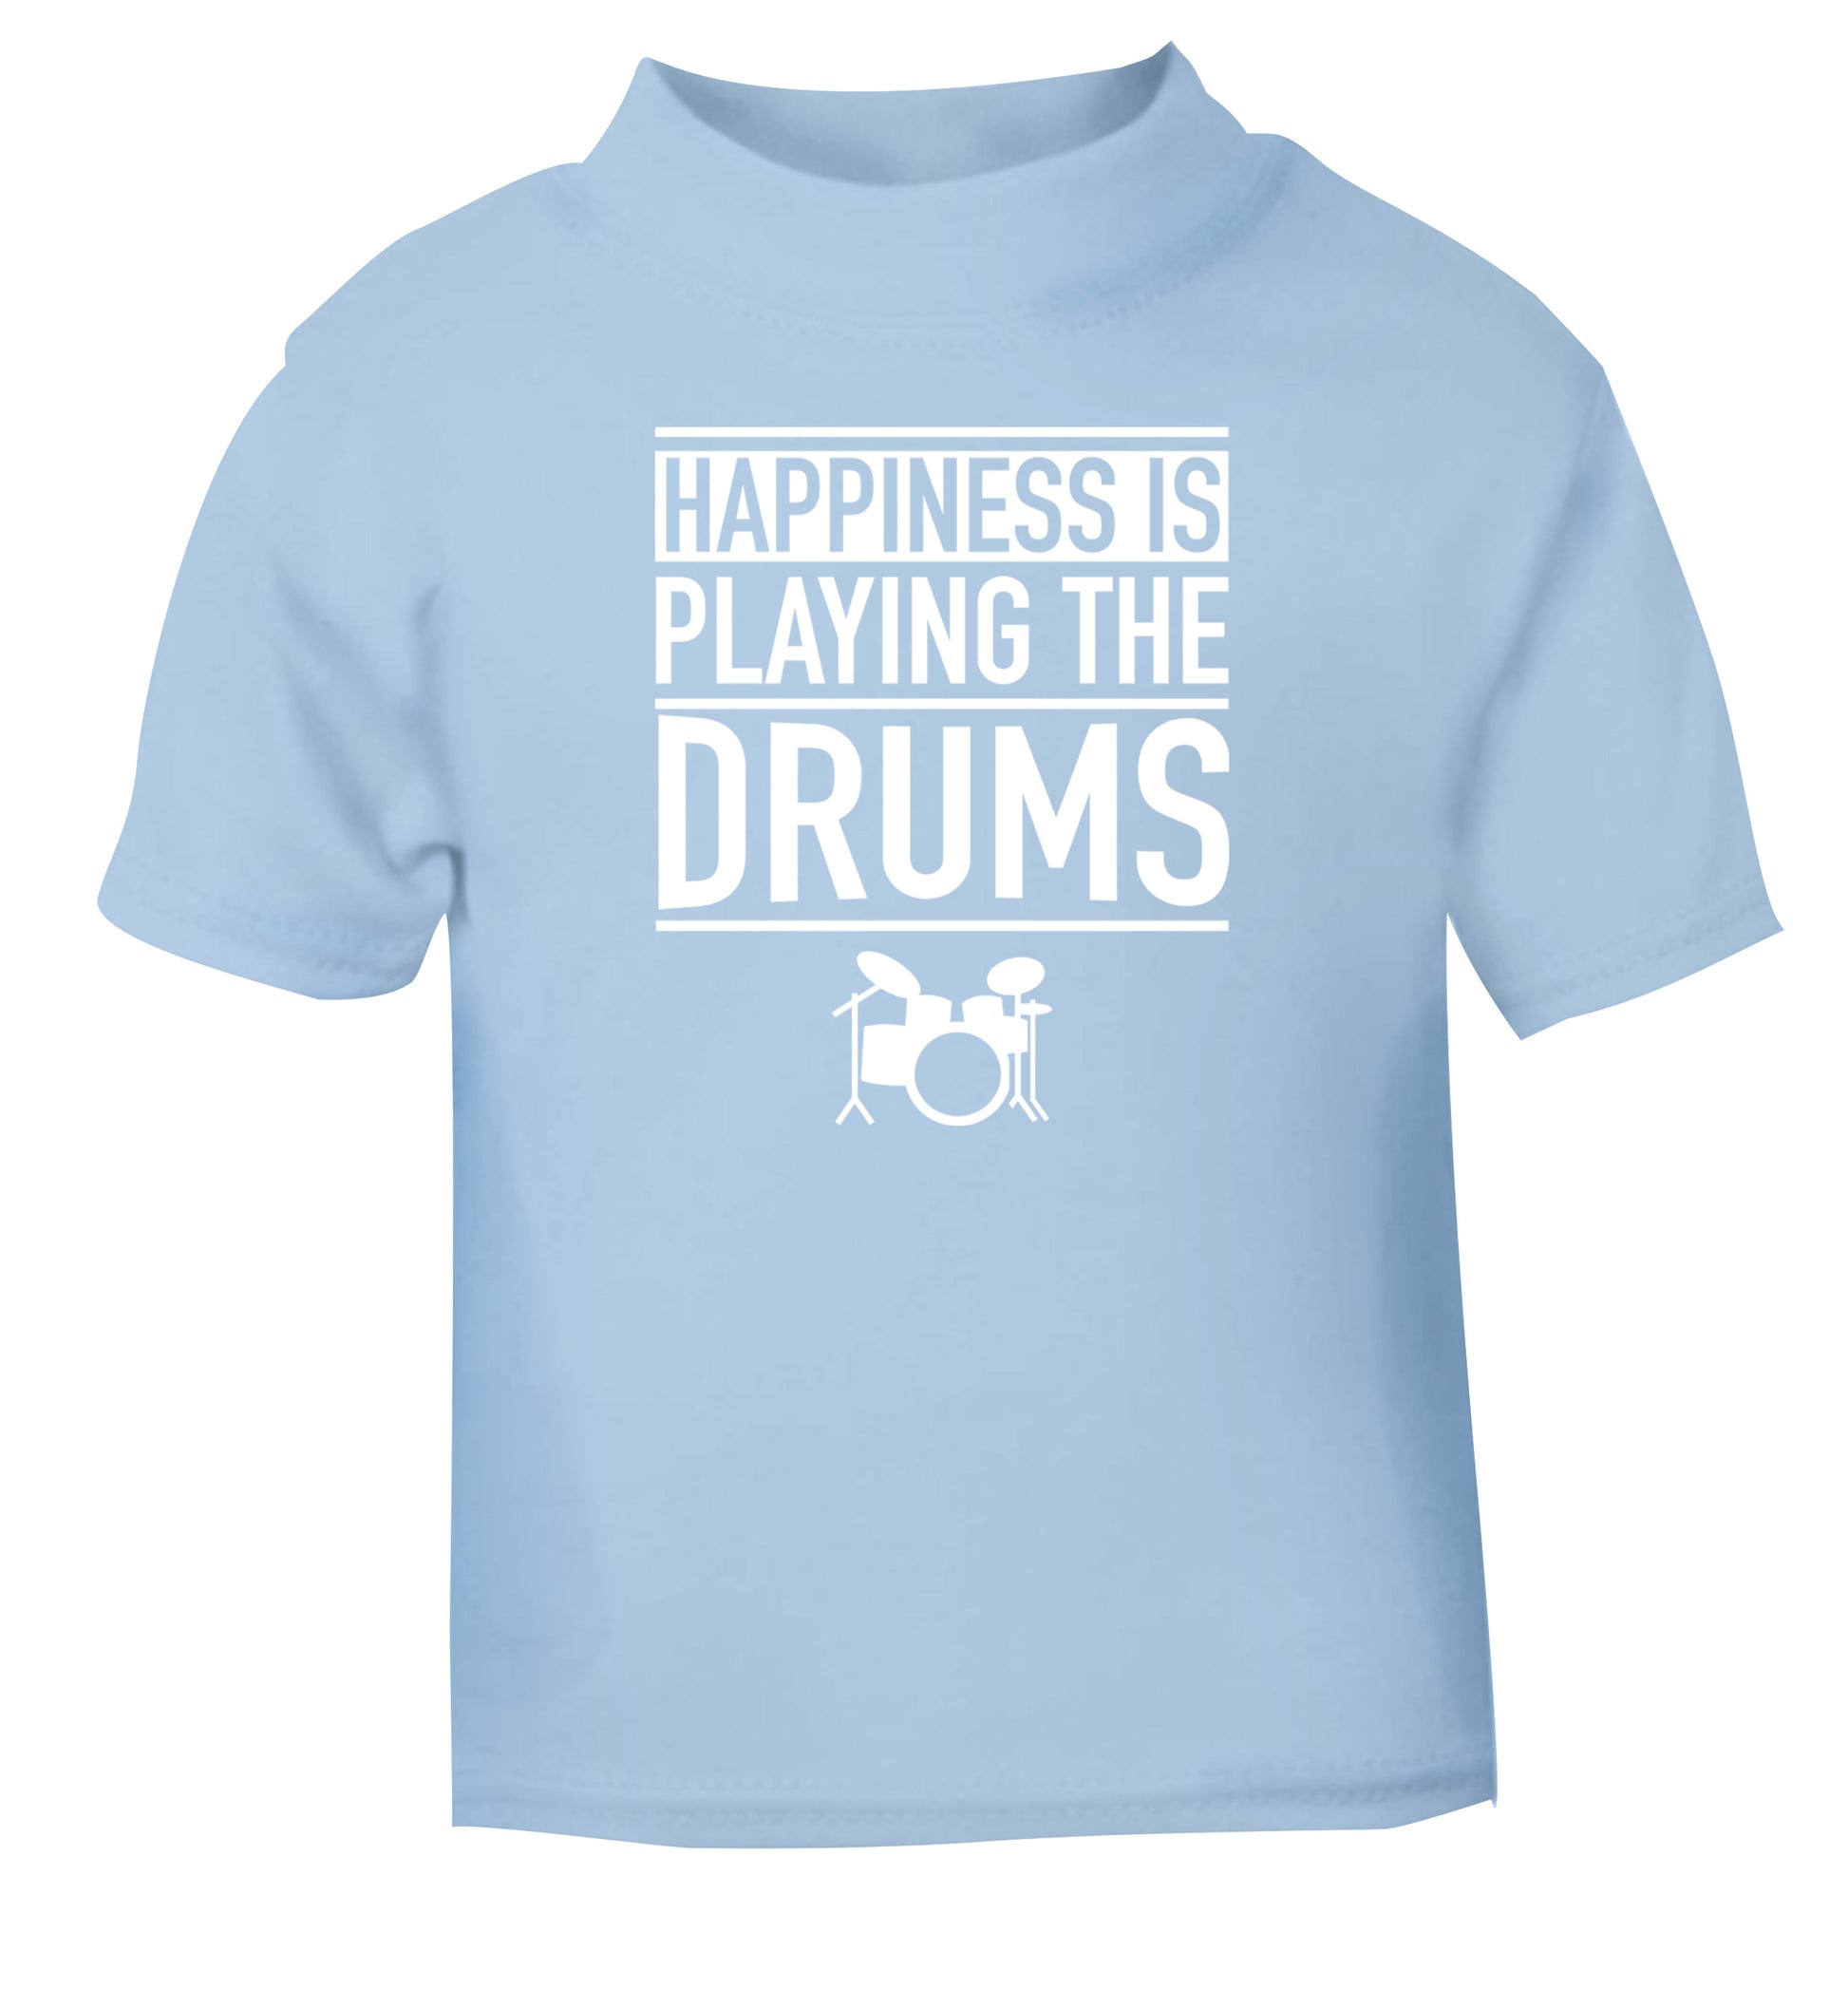 Happiness is playing the drums light blue Baby Toddler Tshirt 2 Years